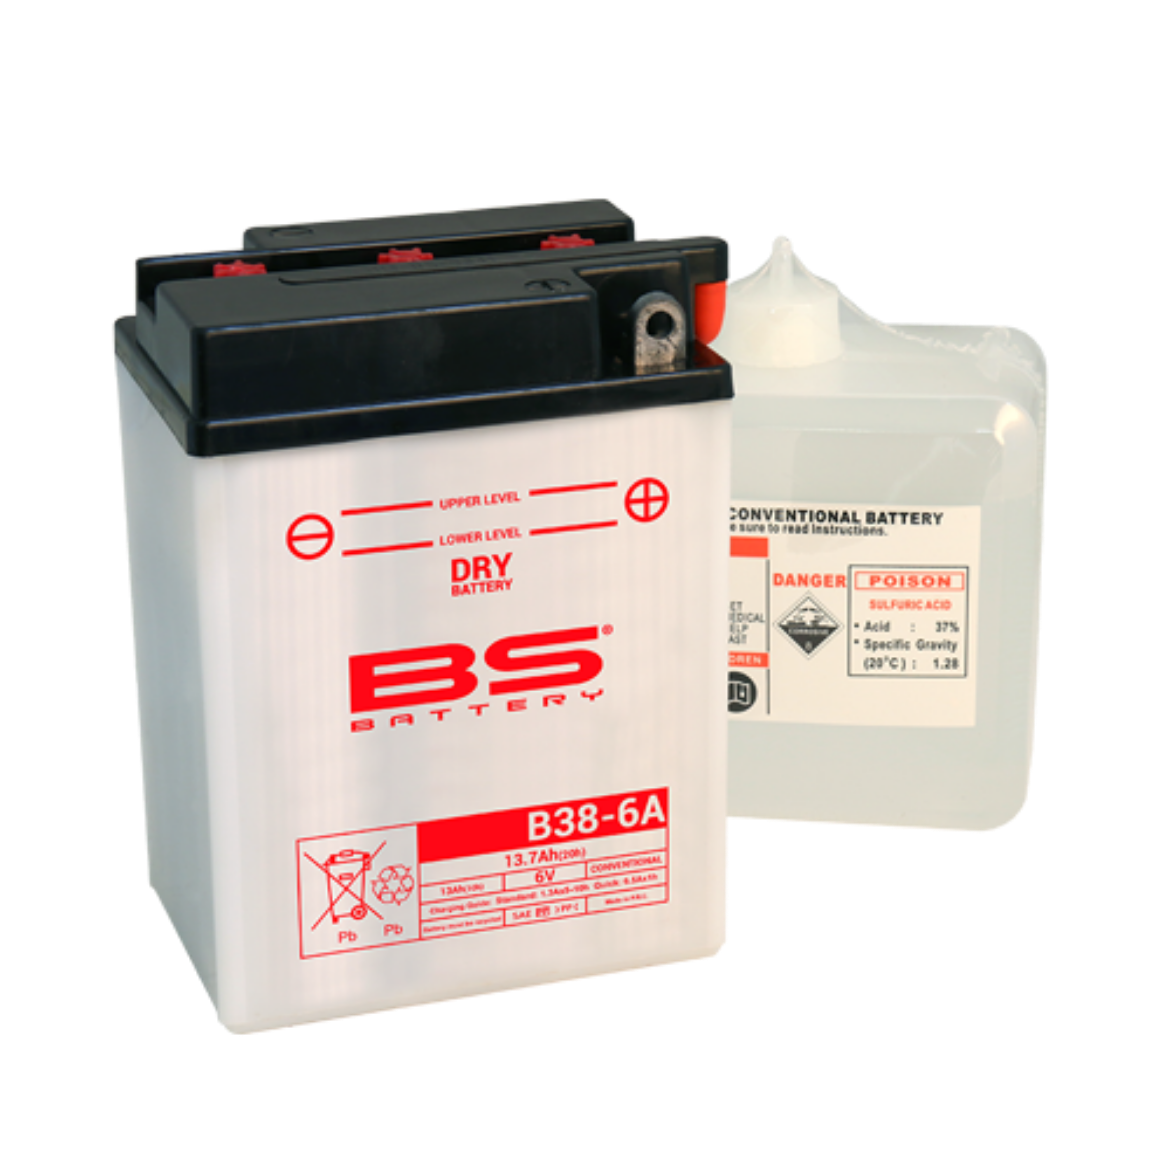 Picture of B38-6A 6V 13AH DRY CONVENTIONAL BS MOTORCYCLE BATTERY